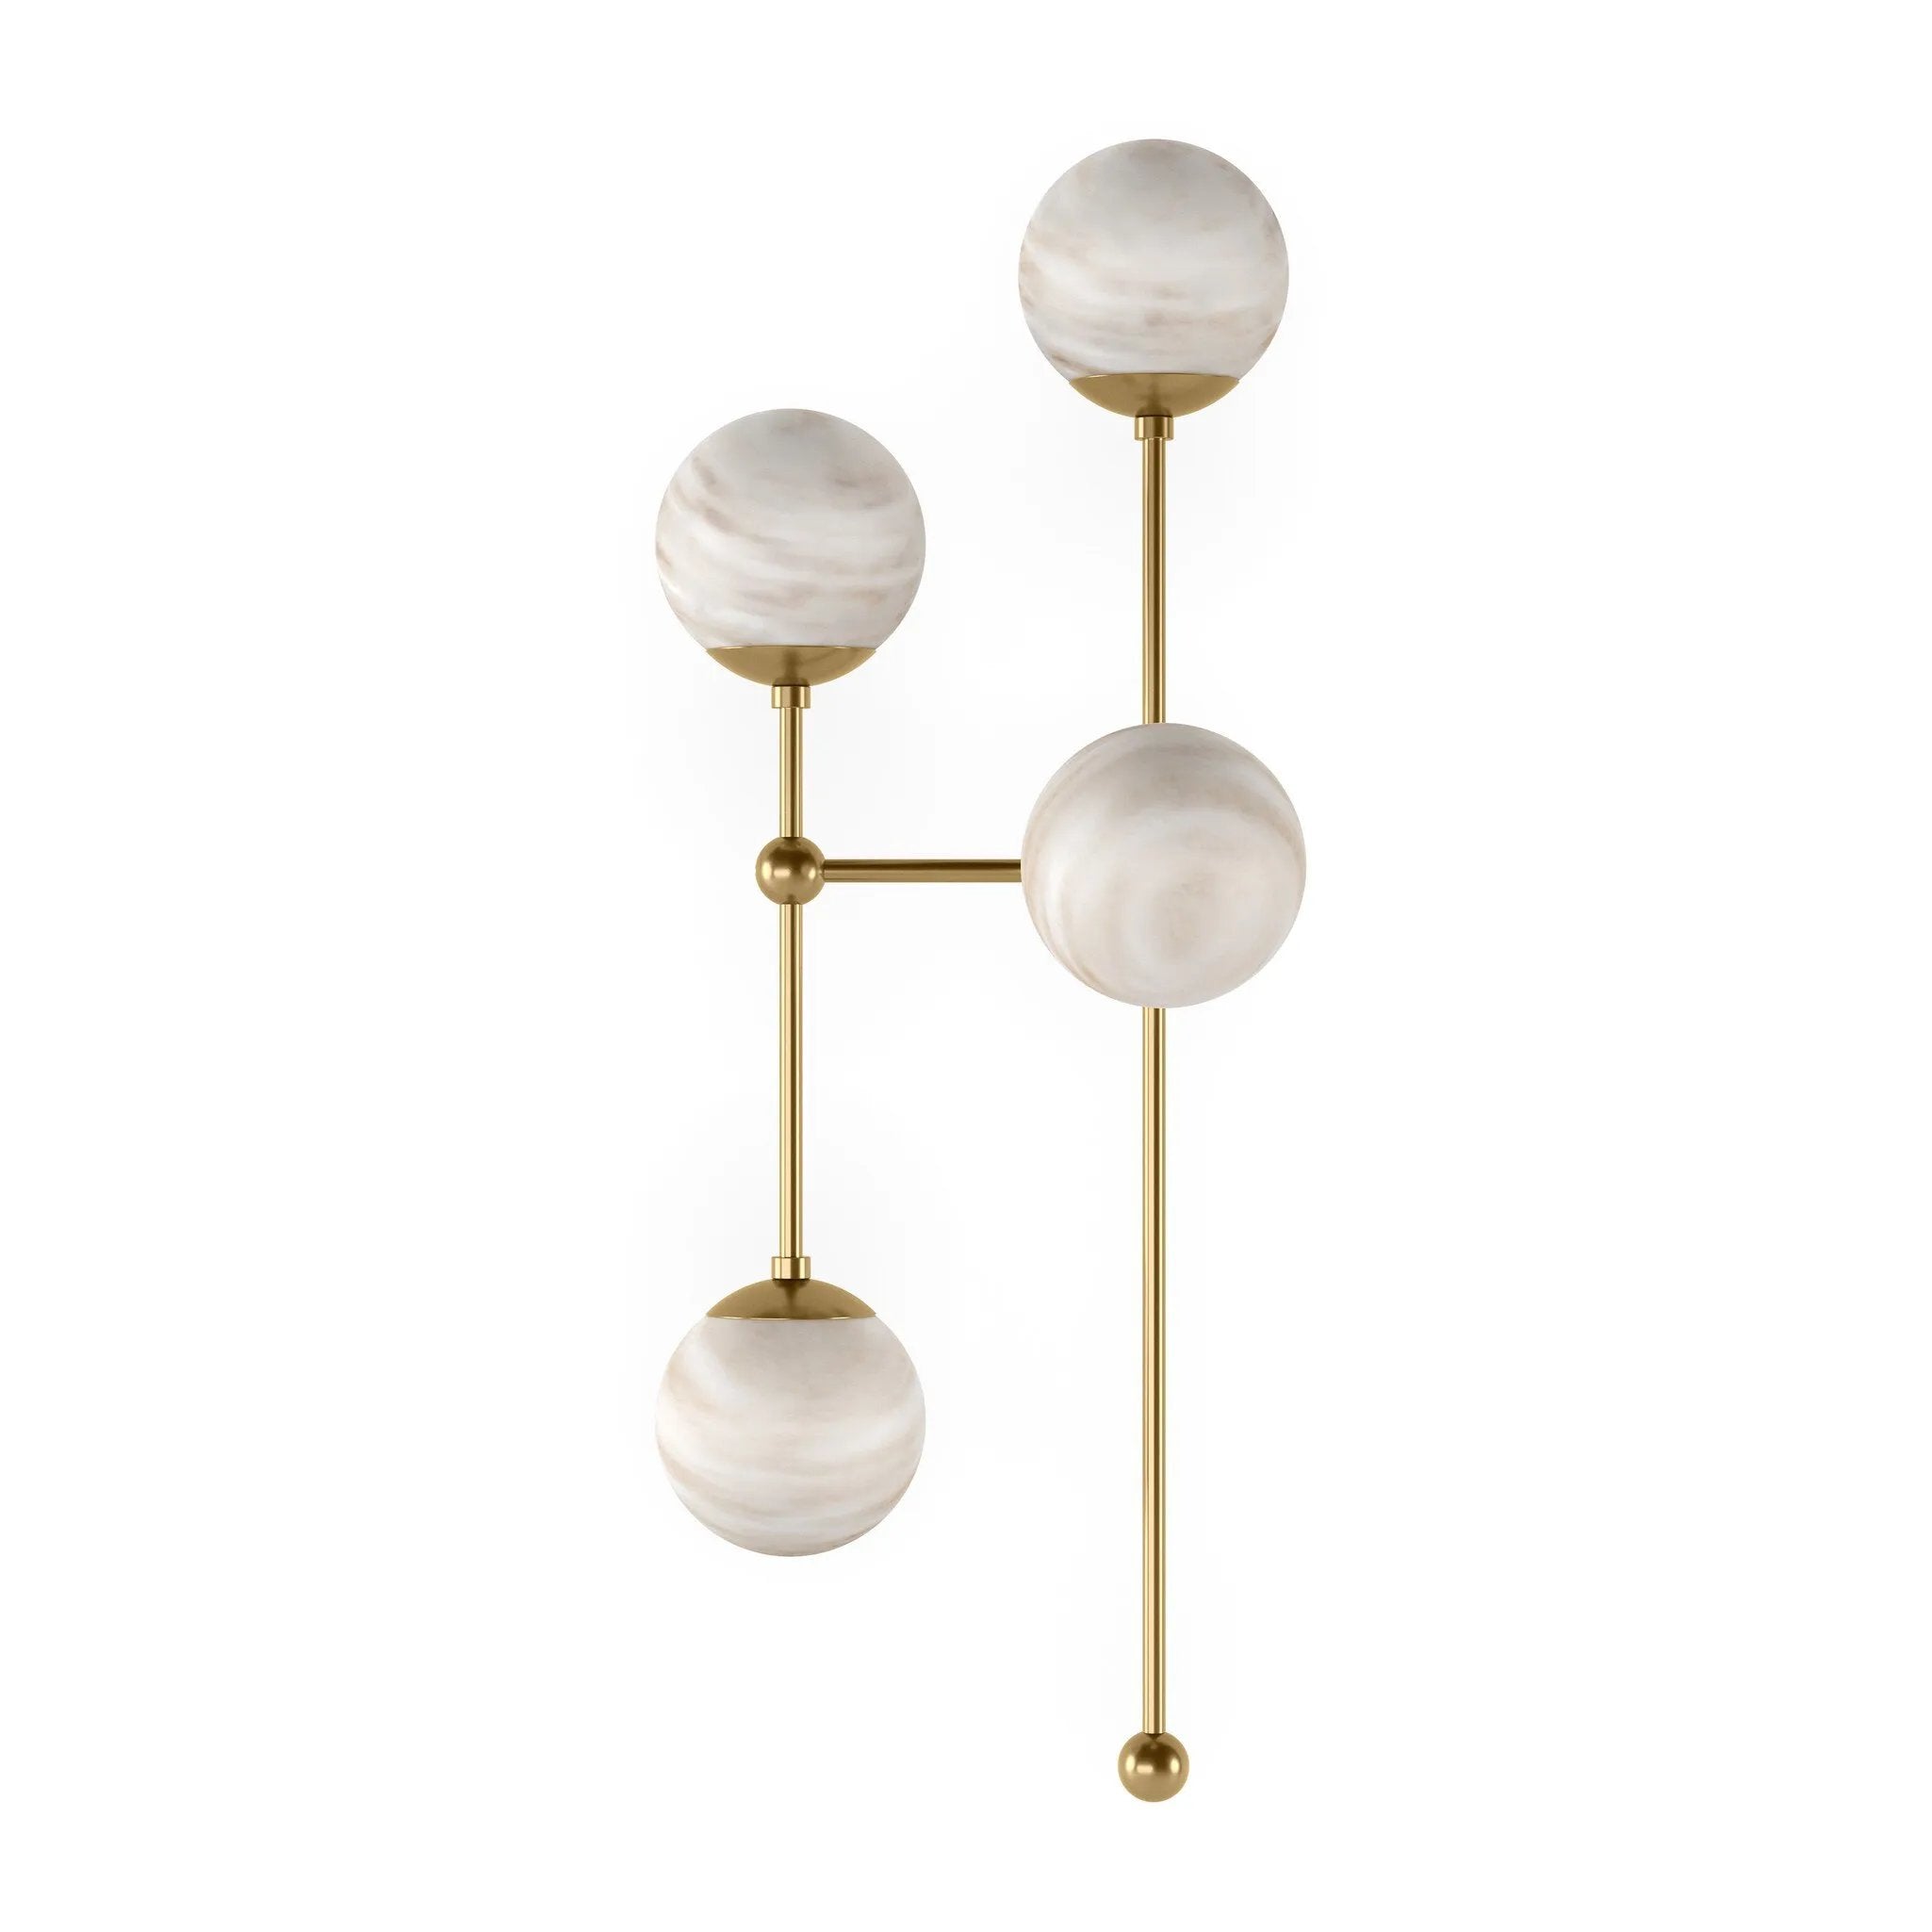 Marbled glass spheres seem to extend and reach across smooth brass rods. Each globe is individually blown, shaped and sculpted by hand through a one-hour process. Brass and glass are 98% recyclable. Designed and sustainably made in Poland by Schwung.Overall Dimensions13.75"w x 13.00"d x 36.25"hFull Details &amp; SpecificationsTear Shee Amethyst Home provides interior design, new home construction design consulting, vintage area rugs, and lighting in the Alpharetta metro area.